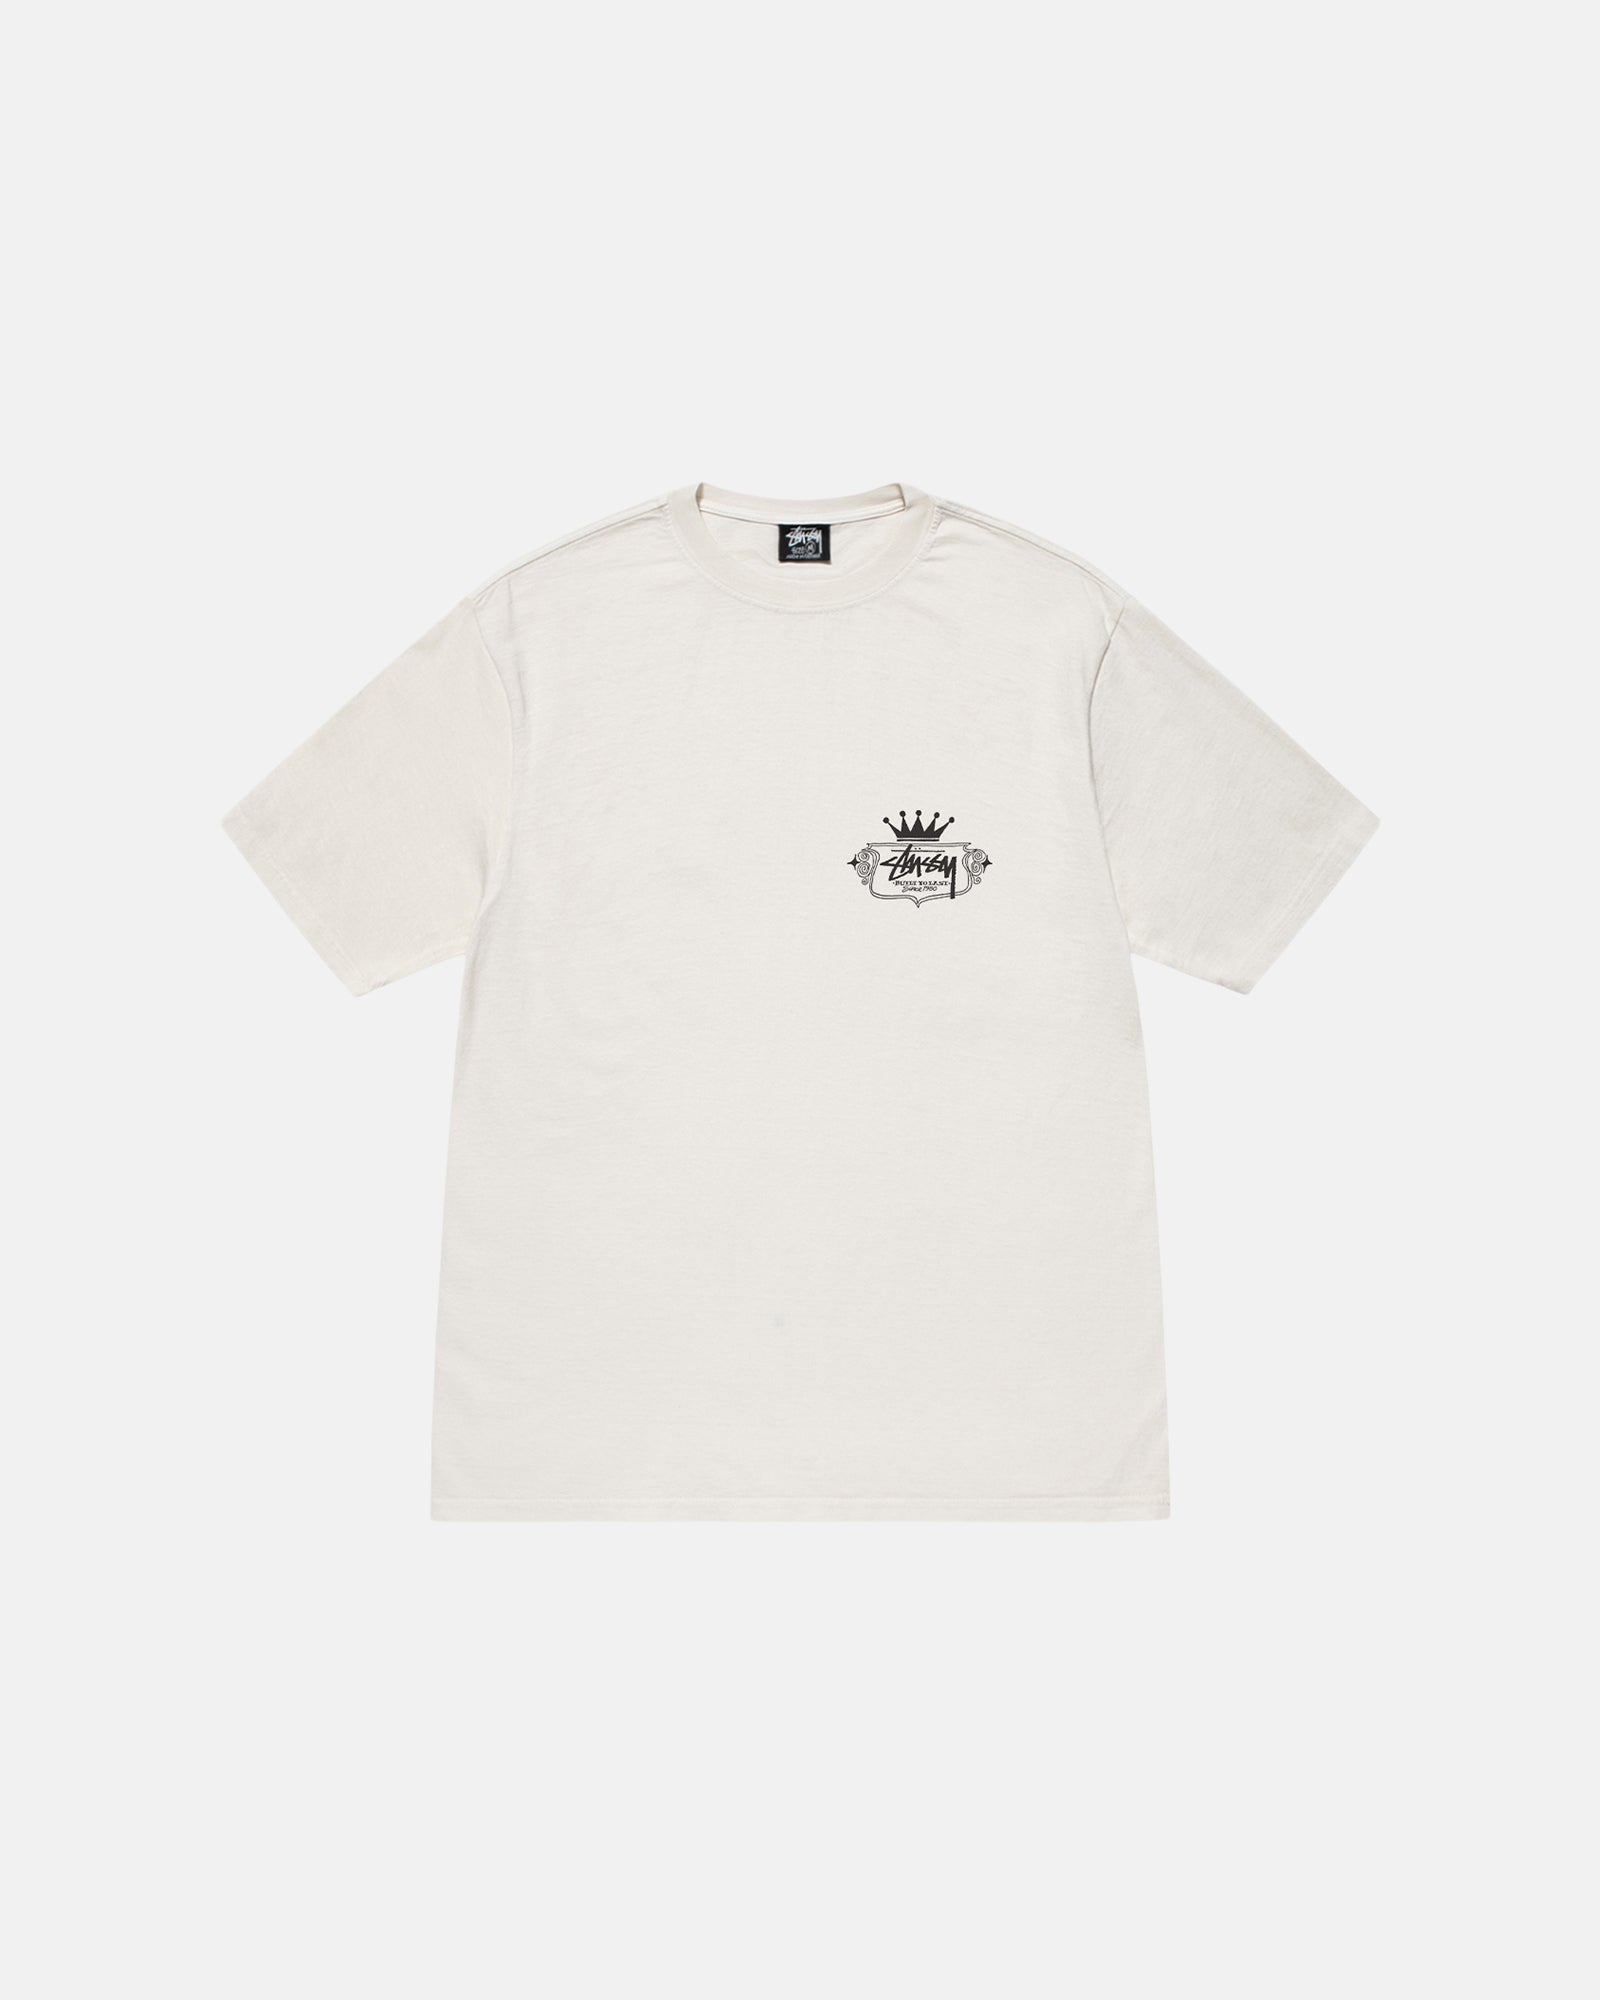 Stüssy Built To Last Tee Pigment Dyed Natural Shortsleeve